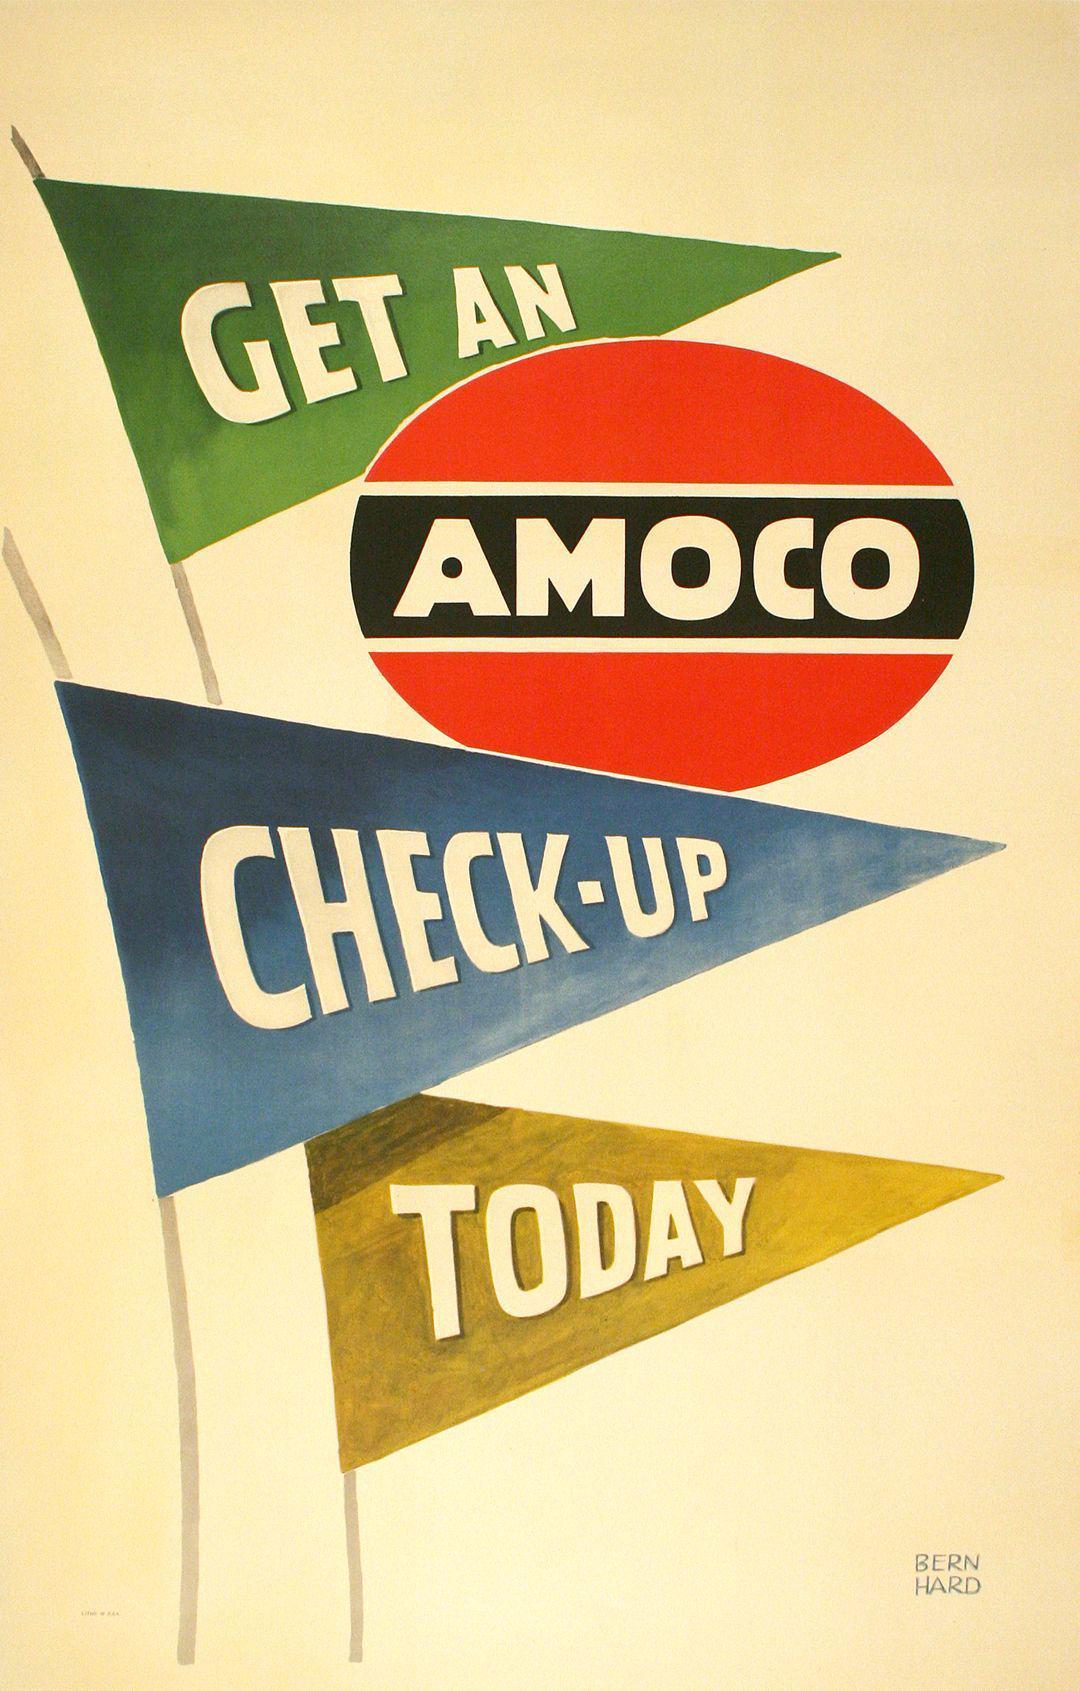 Original 1950's Lucian Bernhard Vintage Poster for Amoco - Get An Amoco Check-Up Today